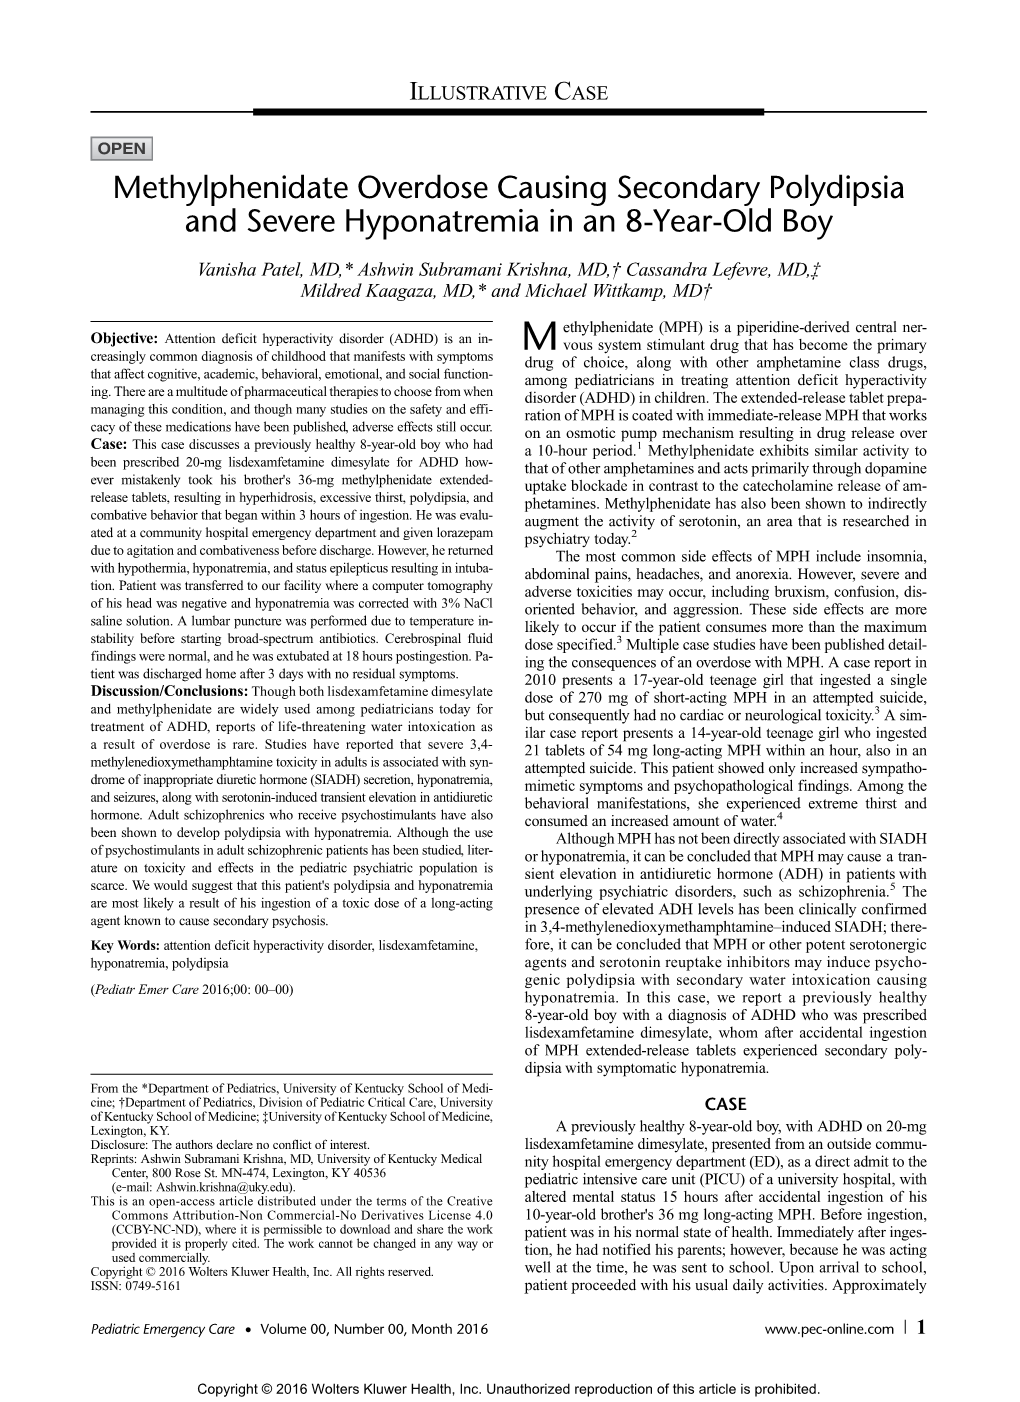 Methylphenidate Overdose Causing Secondary Polydipsia and Severe Hyponatremia in an 8-Year-Old Boy